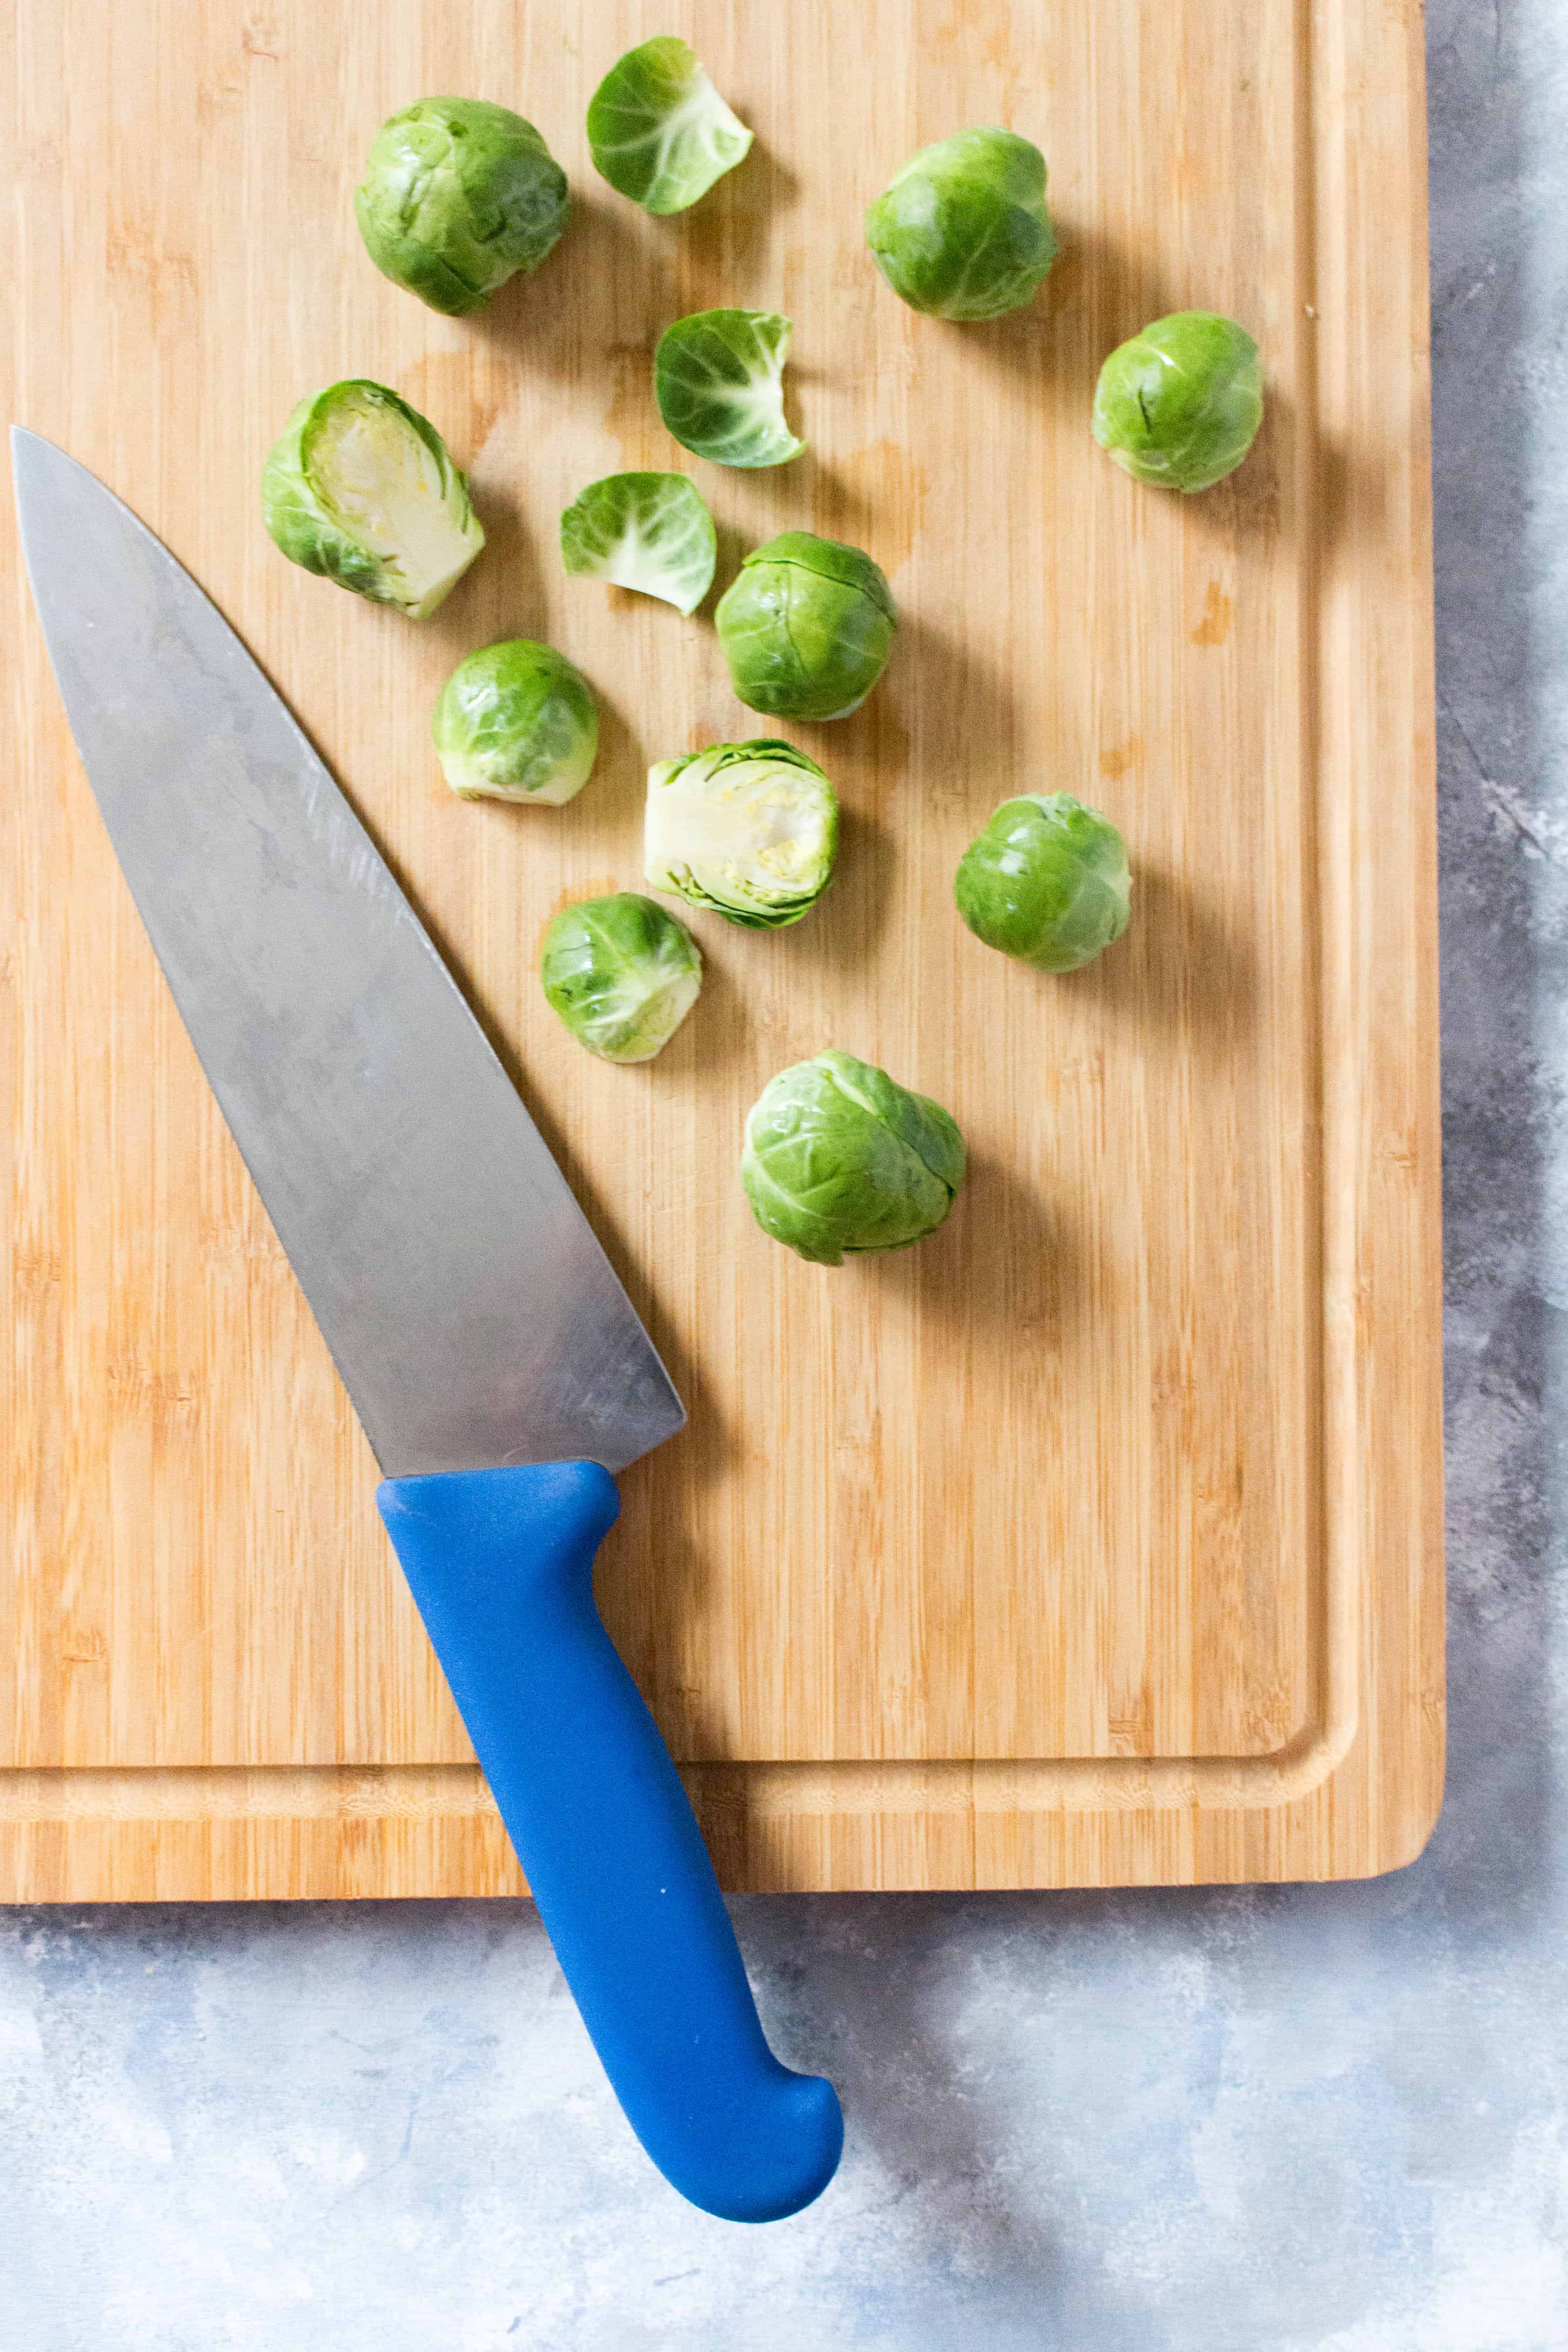 preparing brussels sprouts